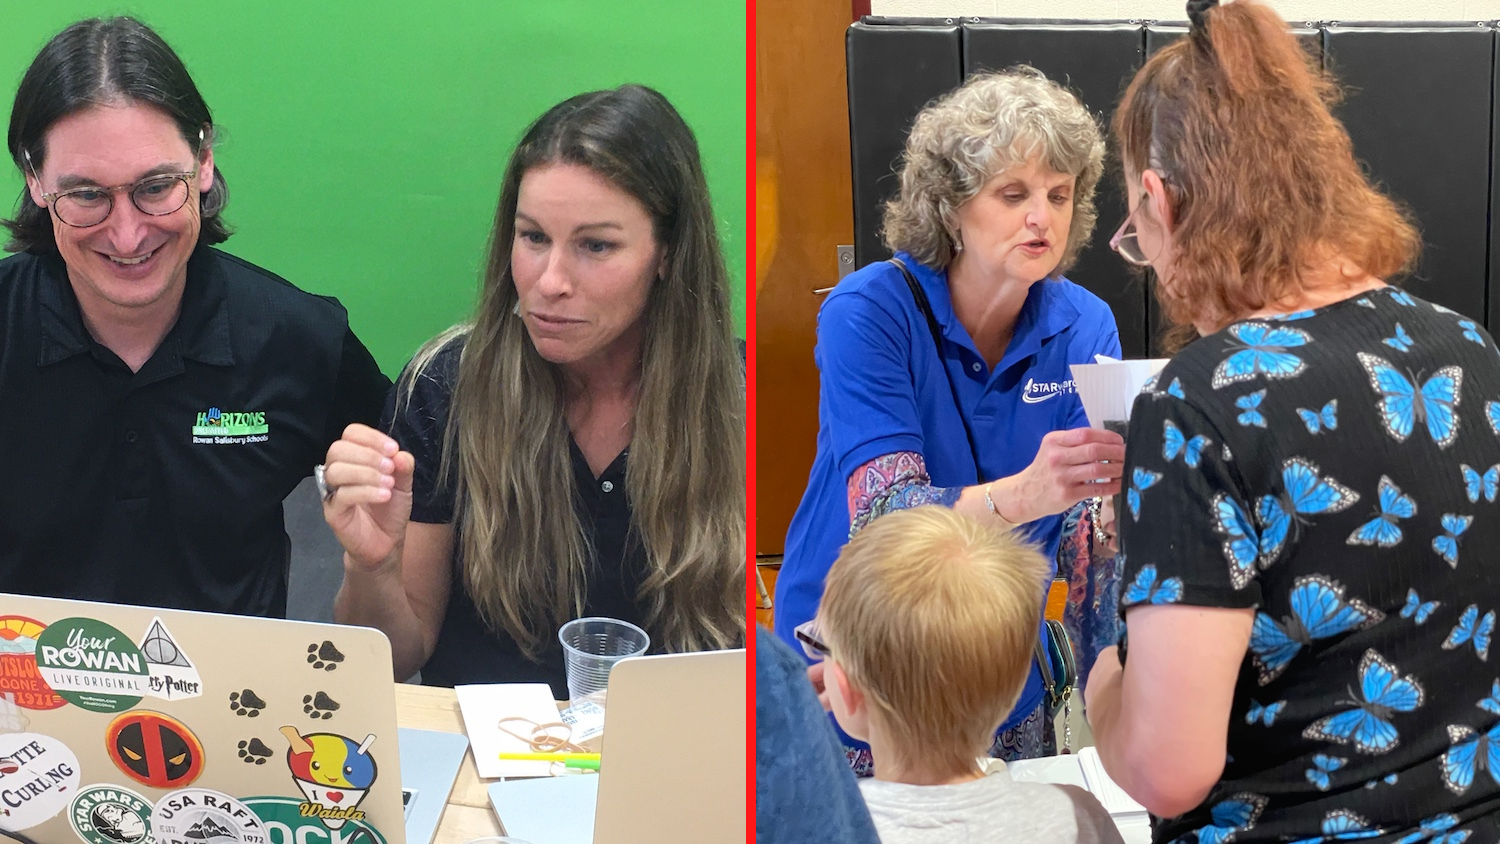 Left: Two NC Space Education Ambassadors lead a workshop on their laptop. Right: An AMbassador leads a mother and son through a STEM activity at a science fair.